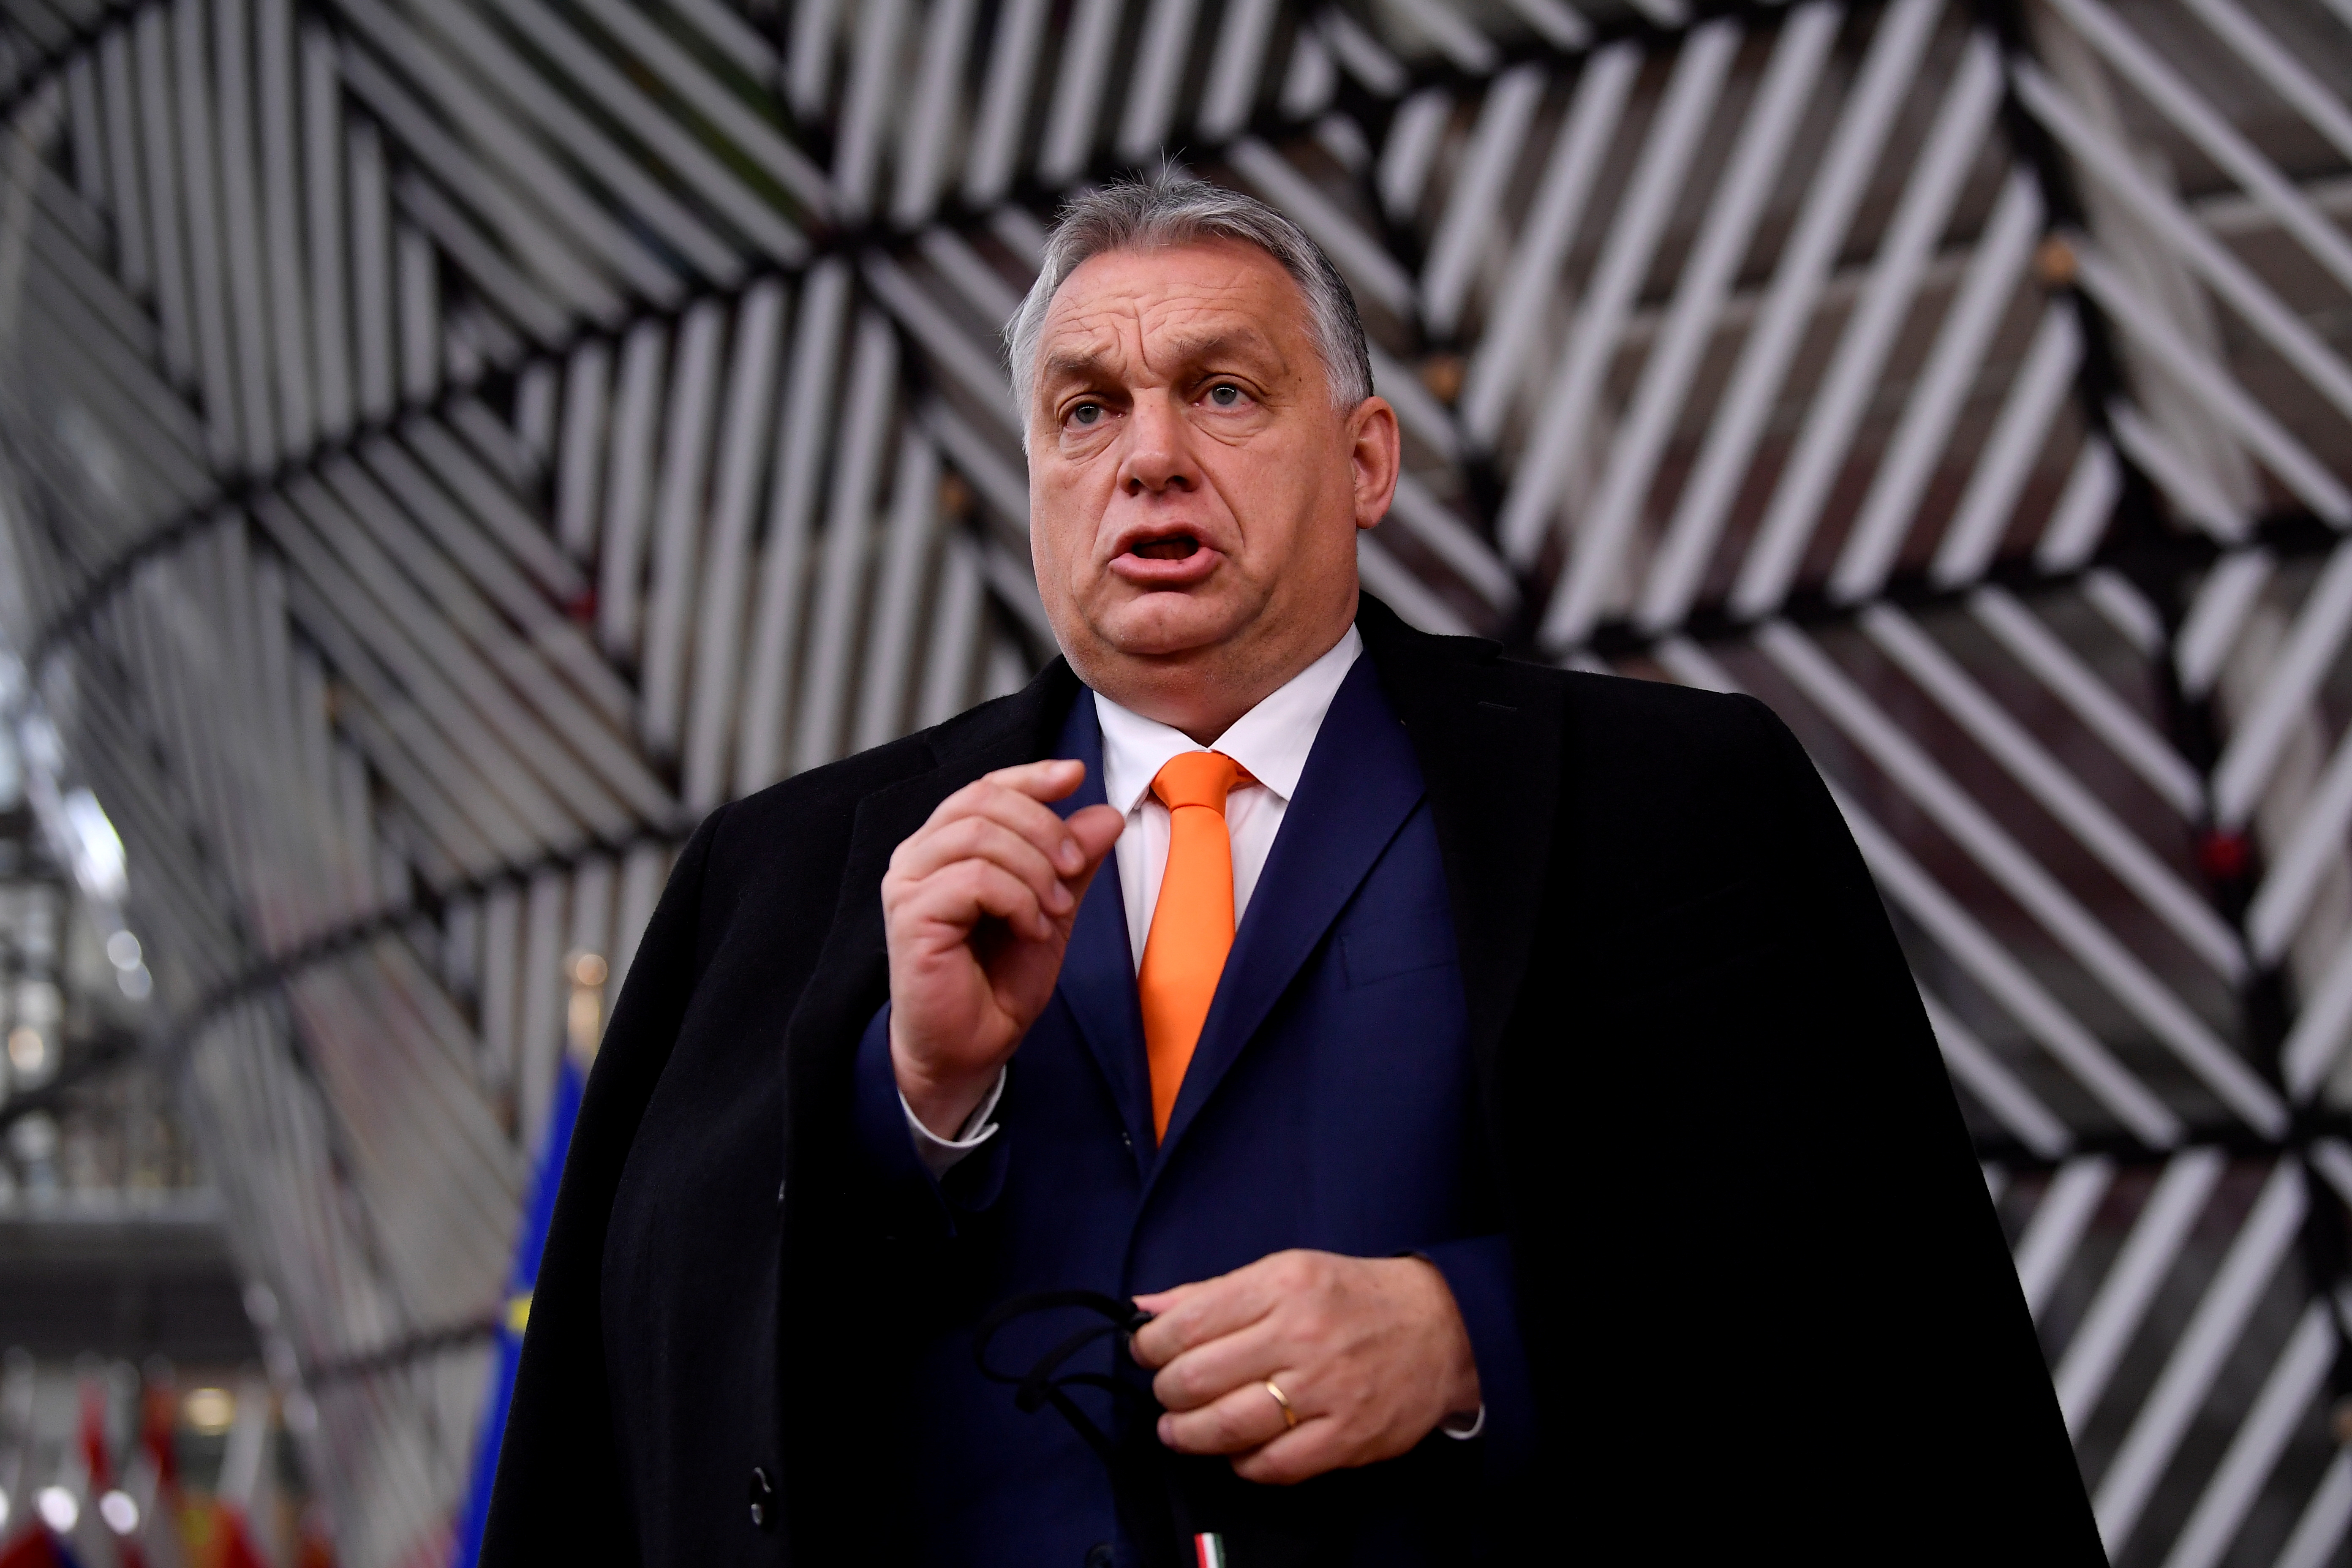 Hungary's Prime Minister Viktor Orban speaks as he arrives to attend a face-to-face EU summit amid the coronavirus disease (COVID-19) lockdown in Brussels, Belgium December 10, 2020. John Thys/Pool via REUTERS/File Photo